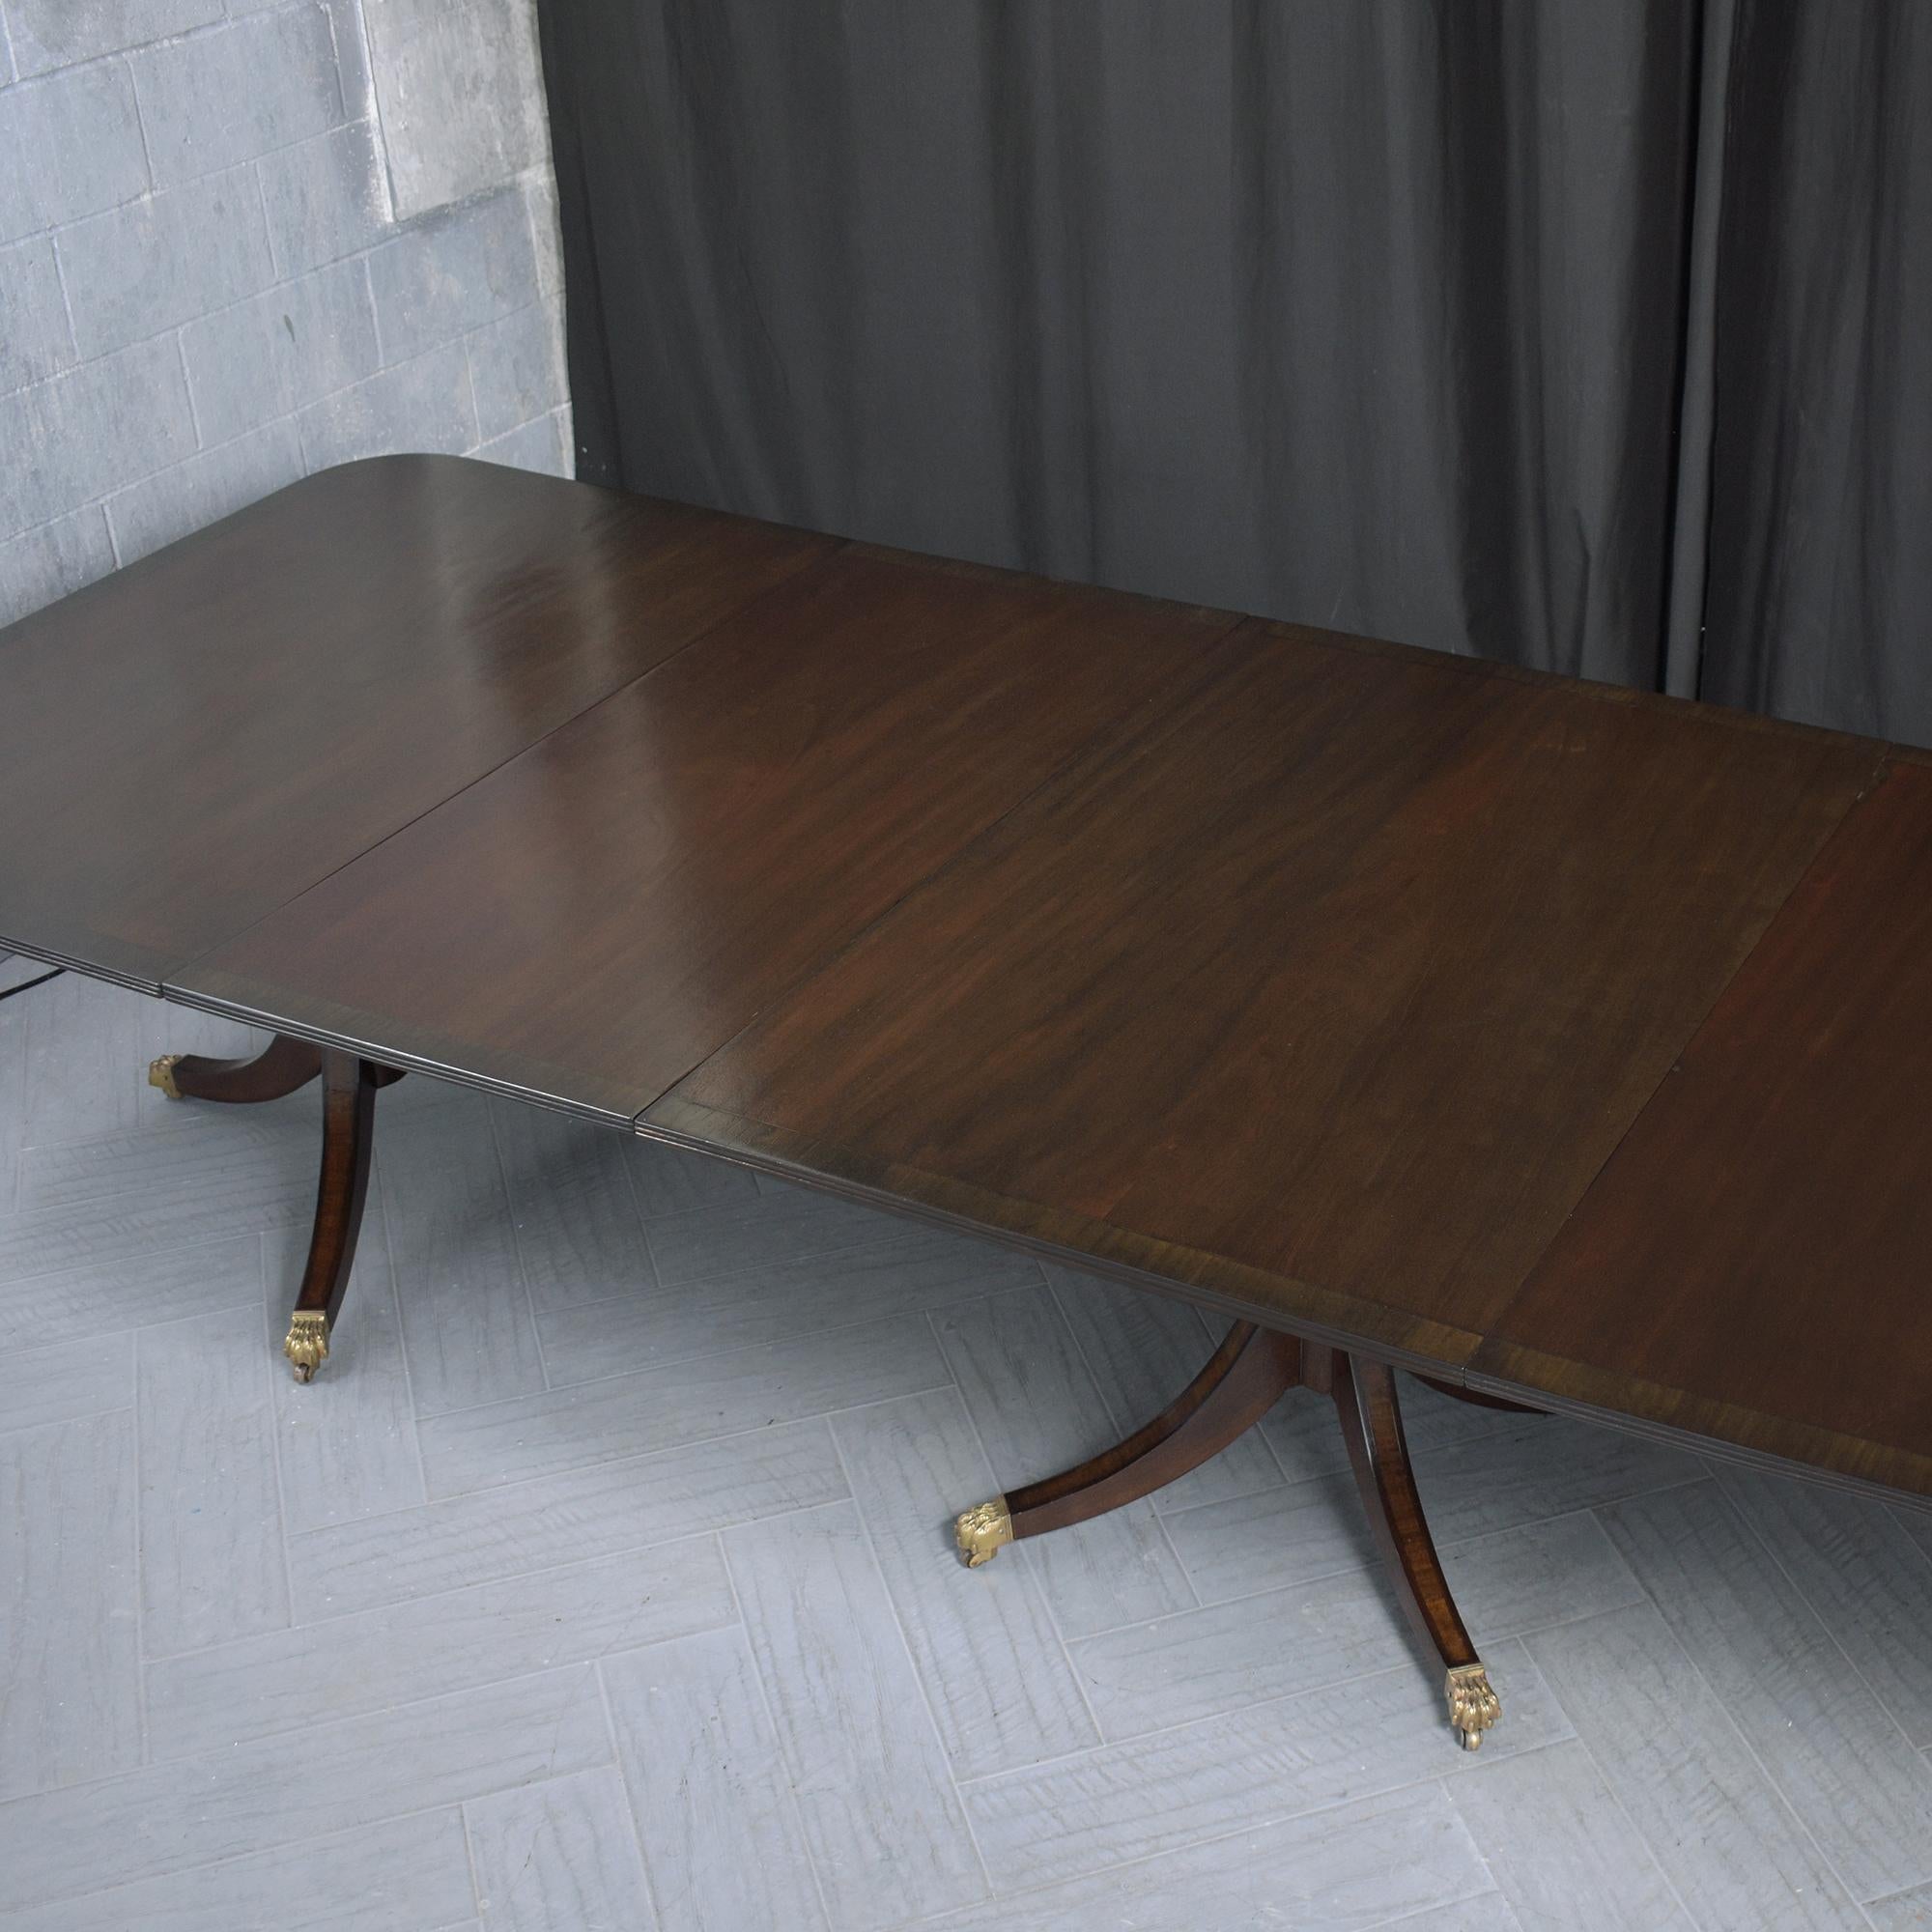 Restored 1890s George III Mahogany Dining Table with Extendable Leaves For Sale 3